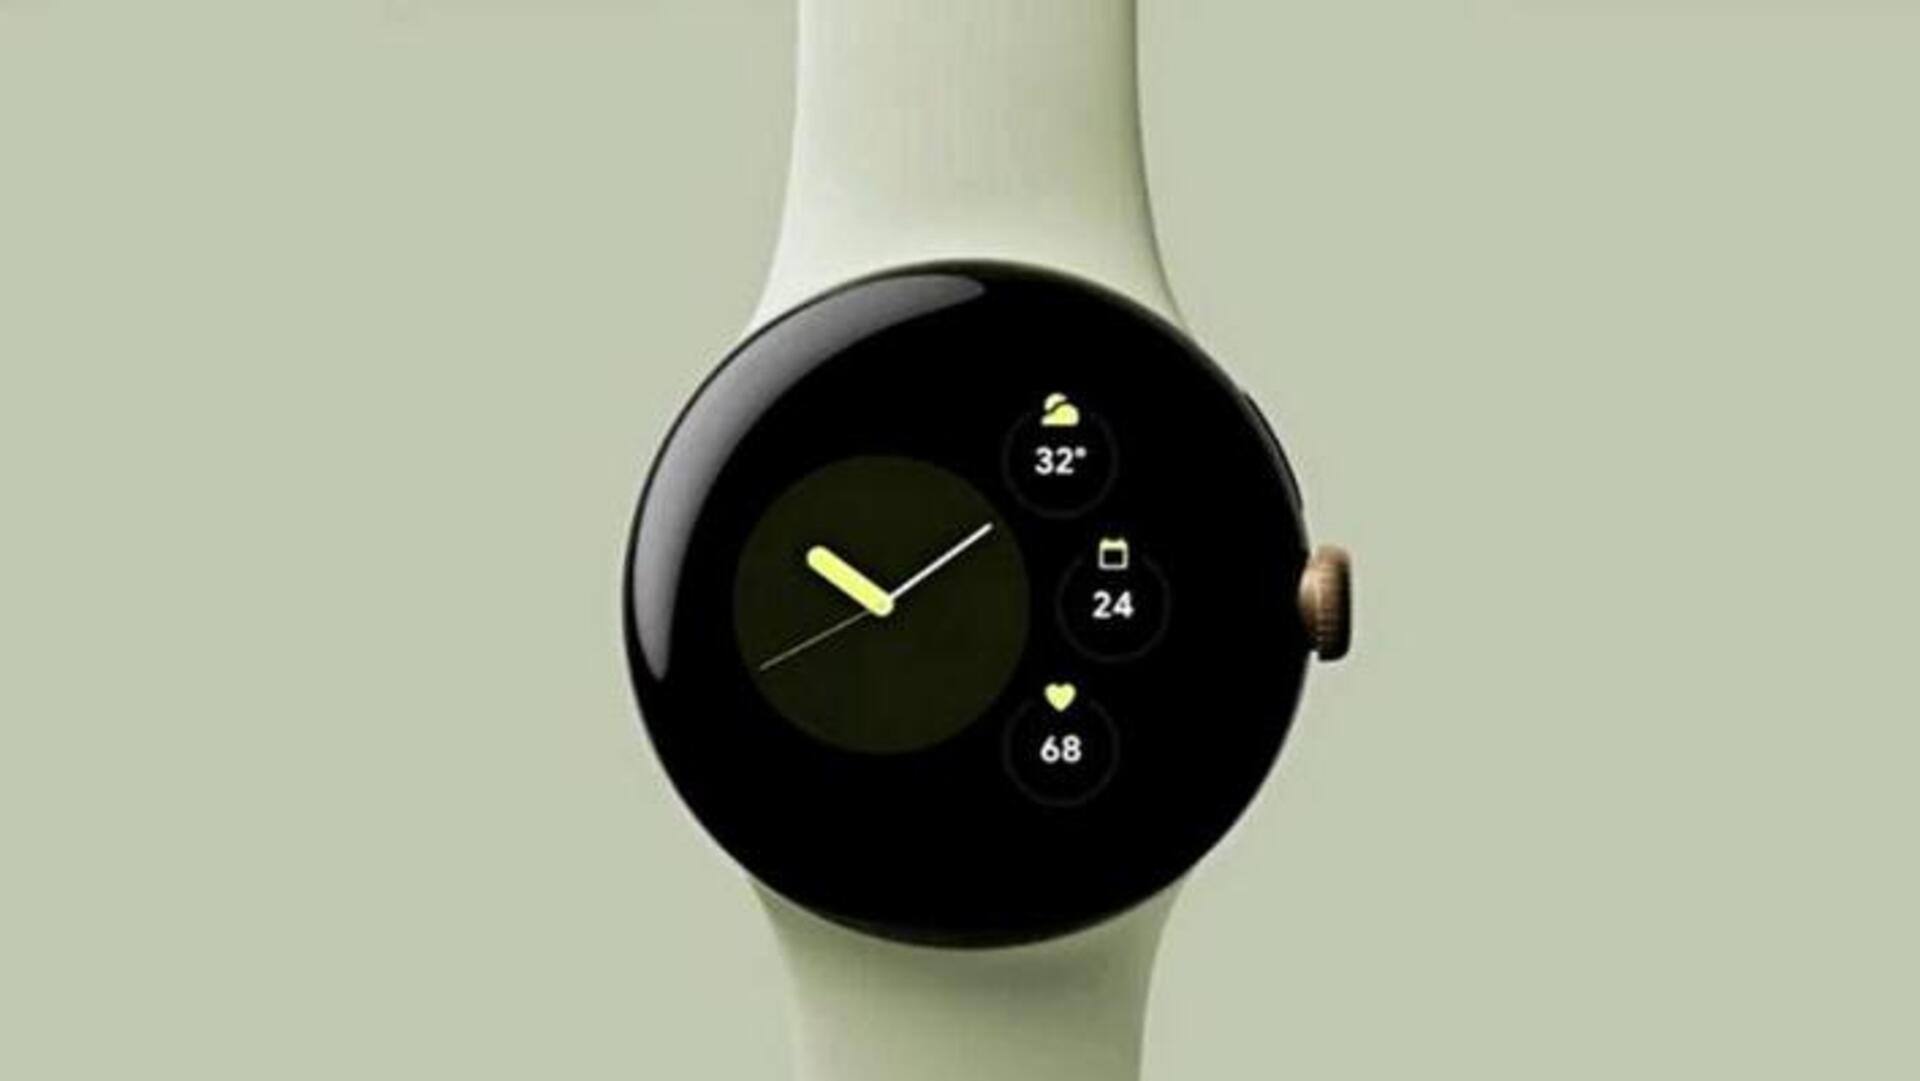 Date disappears from Pixel Watch's 'At a Glance' widget